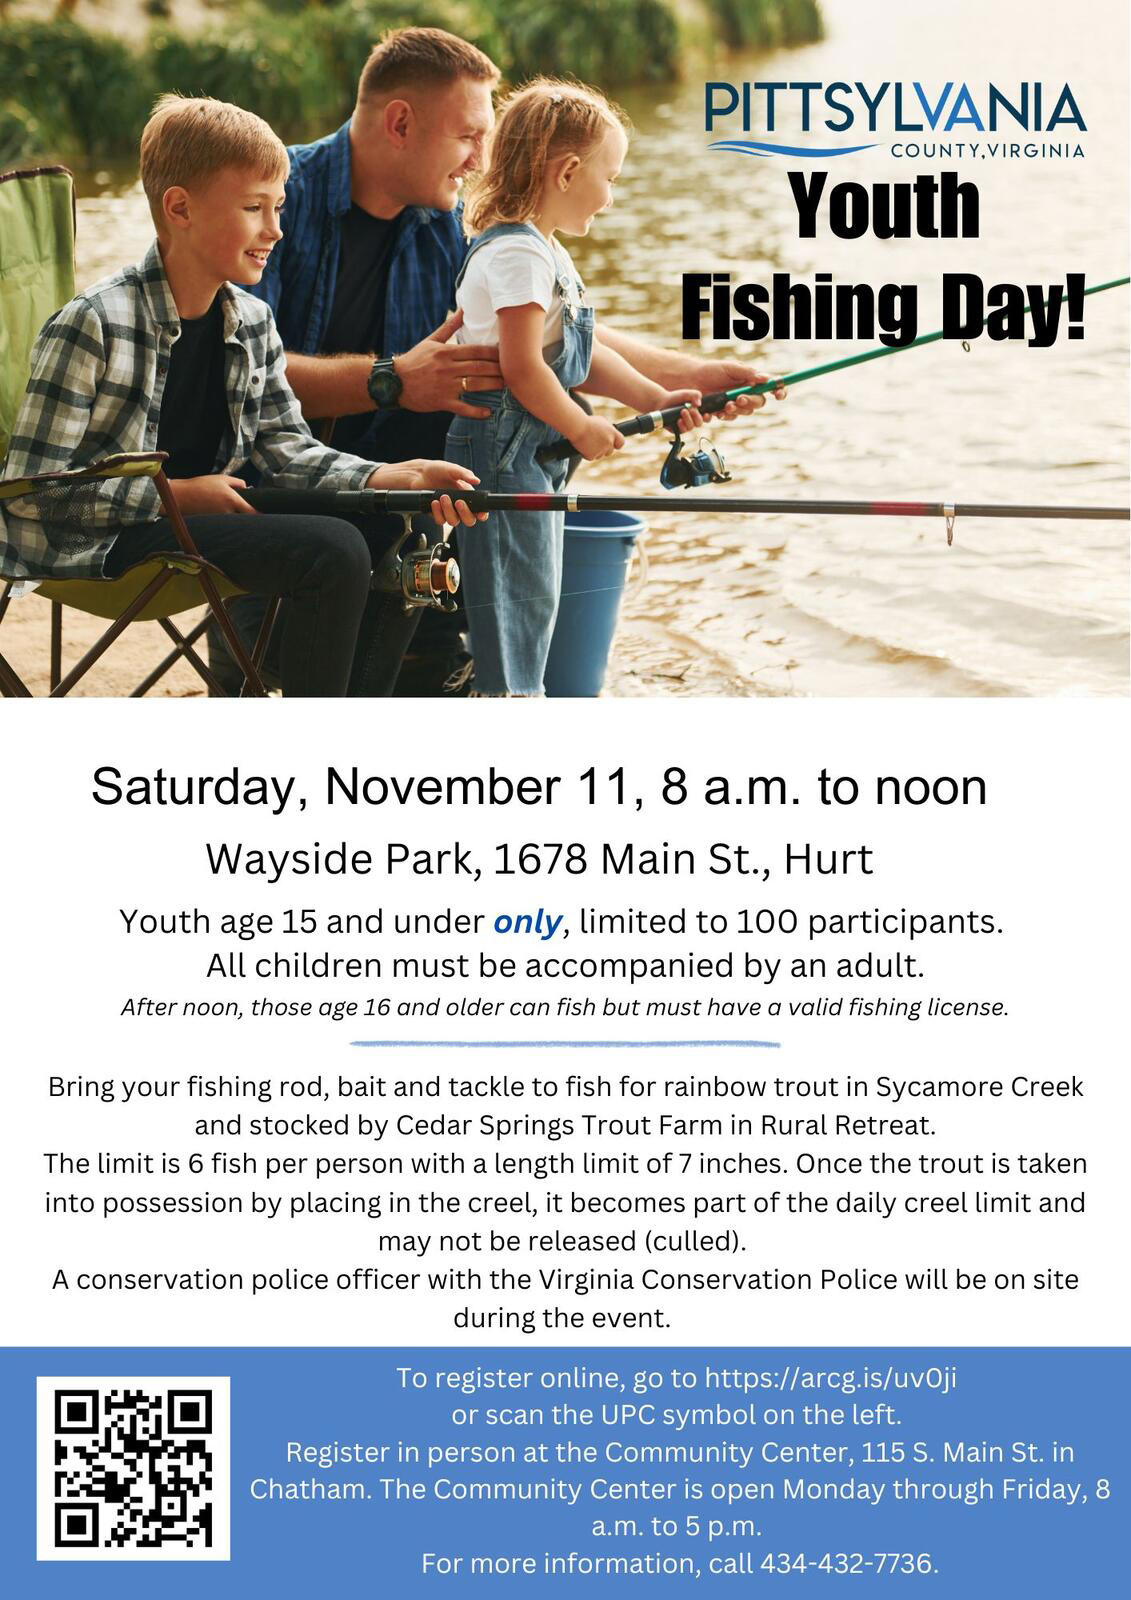 Pittsylvania County's Youth Fishing Day is a great way to connect with